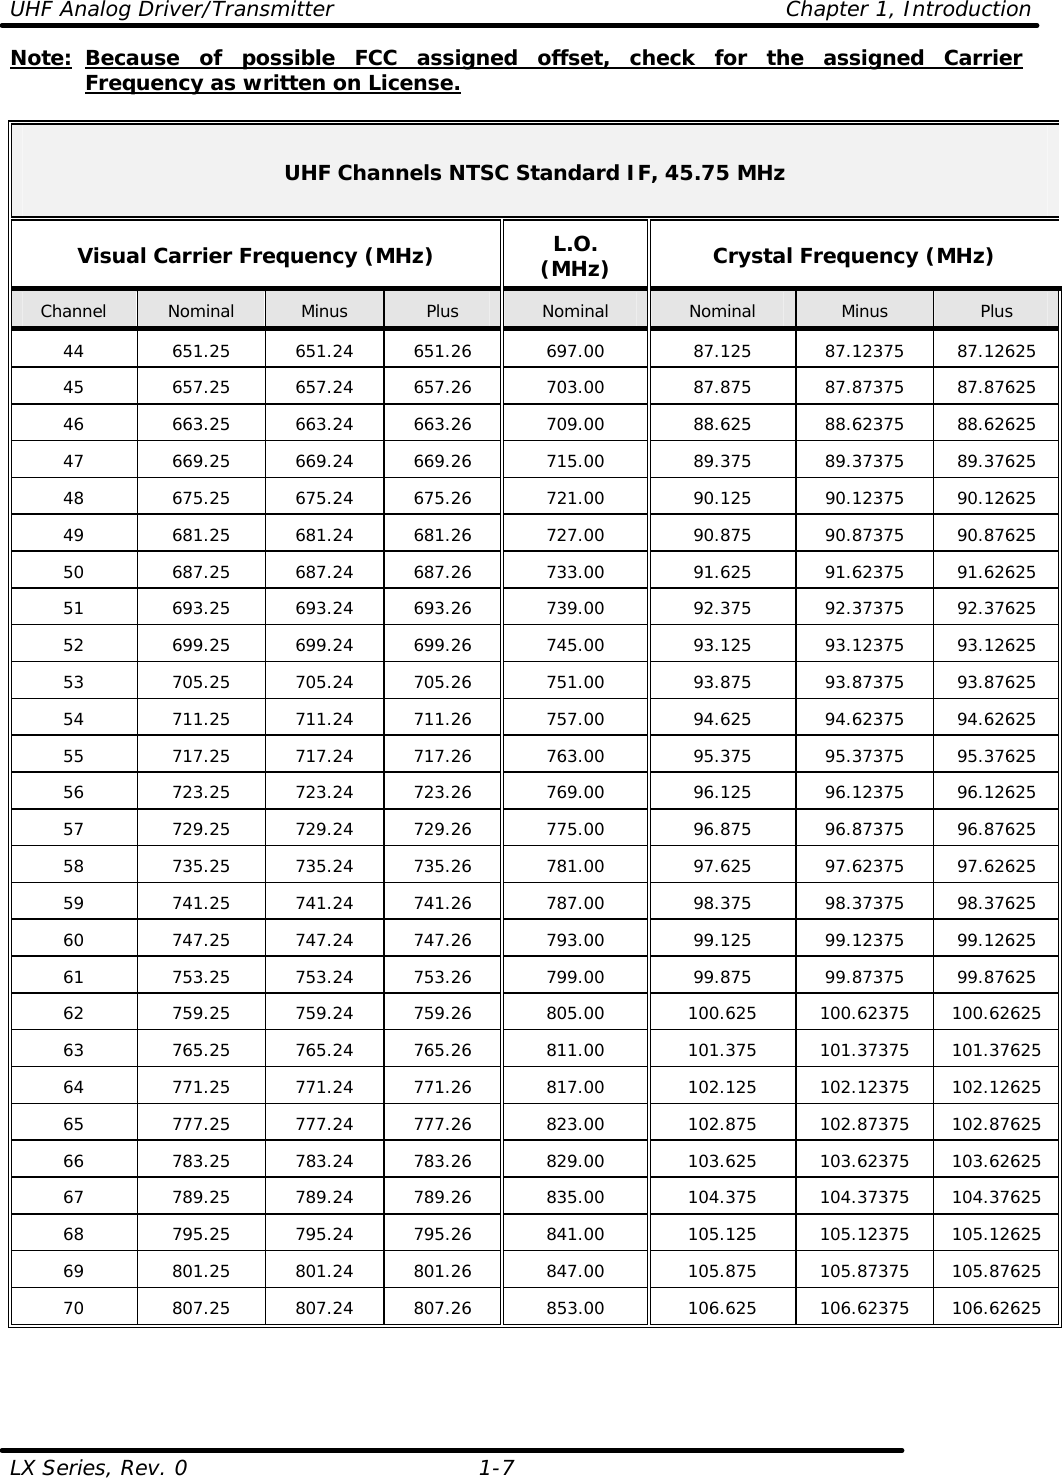 UHF Analog Driver/Transmitter    Chapter 1, Introduction  LX Series, Rev. 0    1-7 Note: Because of possible FCC assigned offset, check for the assigned Carrier Frequency as written on License.   UHF Channels NTSC Standard IF, 45.75 MHz  Visual Carrier Frequency (MHz) L.O. (MHz) Crystal Frequency (MHz) Channel Nominal Minus Plus Nominal Nominal Minus Plus 44 651.25 651.24 651.26 697.00 87.125 87.12375 87.12625 45 657.25 657.24 657.26 703.00 87.875 87.87375 87.87625 46 663.25 663.24 663.26 709.00 88.625 88.62375 88.62625 47 669.25 669.24 669.26 715.00 89.375 89.37375 89.37625 48 675.25 675.24 675.26 721.00 90.125 90.12375 90.12625 49 681.25 681.24 681.26 727.00 90.875 90.87375 90.87625 50 687.25 687.24 687.26 733.00 91.625 91.62375 91.62625 51 693.25 693.24 693.26 739.00 92.375 92.37375 92.37625 52 699.25 699.24 699.26 745.00 93.125 93.12375 93.12625 53 705.25 705.24 705.26 751.00 93.875 93.87375 93.87625 54 711.25 711.24 711.26 757.00 94.625 94.62375 94.62625 55 717.25 717.24 717.26 763.00 95.375 95.37375 95.37625 56 723.25 723.24 723.26 769.00 96.125 96.12375 96.12625 57 729.25 729.24 729.26 775.00 96.875 96.87375 96.87625 58 735.25 735.24 735.26 781.00 97.625 97.62375 97.62625 59 741.25 741.24 741.26 787.00 98.375 98.37375 98.37625 60 747.25 747.24 747.26 793.00 99.125 99.12375 99.12625 61 753.25 753.24 753.26 799.00 99.875 99.87375 99.87625 62 759.25 759.24 759.26 805.00 100.625 100.62375 100.62625 63 765.25 765.24 765.26 811.00 101.375 101.37375 101.37625 64 771.25 771.24 771.26 817.00 102.125 102.12375 102.12625 65 777.25 777.24 777.26 823.00 102.875 102.87375 102.87625 66 783.25 783.24 783.26 829.00 103.625 103.62375 103.62625 67 789.25 789.24 789.26 835.00 104.375 104.37375 104.37625 68 795.25 795.24 795.26 841.00 105.125 105.12375 105.12625 69 801.25 801.24 801.26 847.00 105.875 105.87375 105.87625 70 807.25 807.24 807.26 853.00 106.625 106.62375 106.62625       